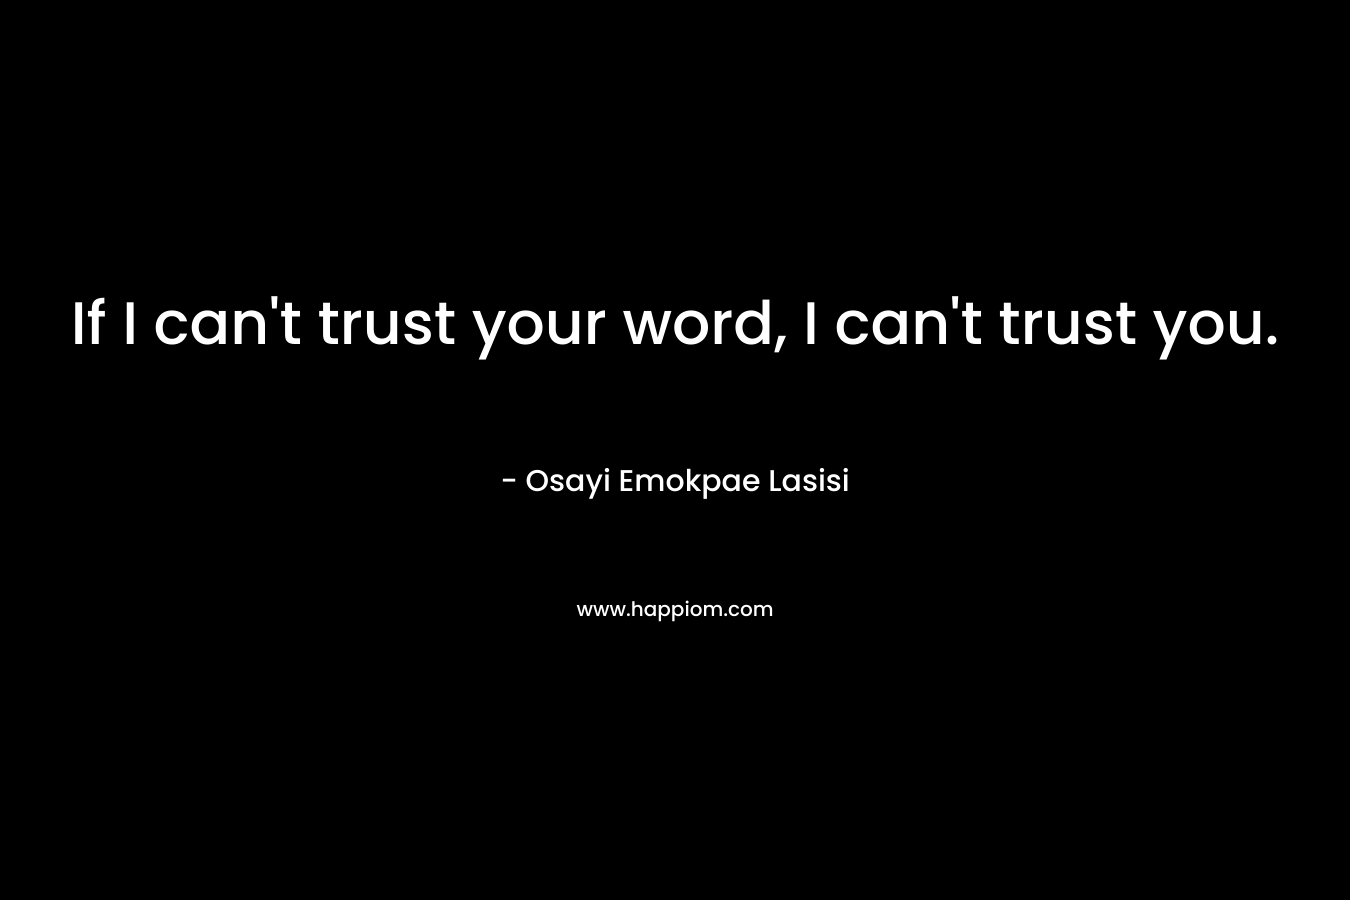 If I can’t trust your word, I can’t trust you. – Osayi Emokpae Lasisi